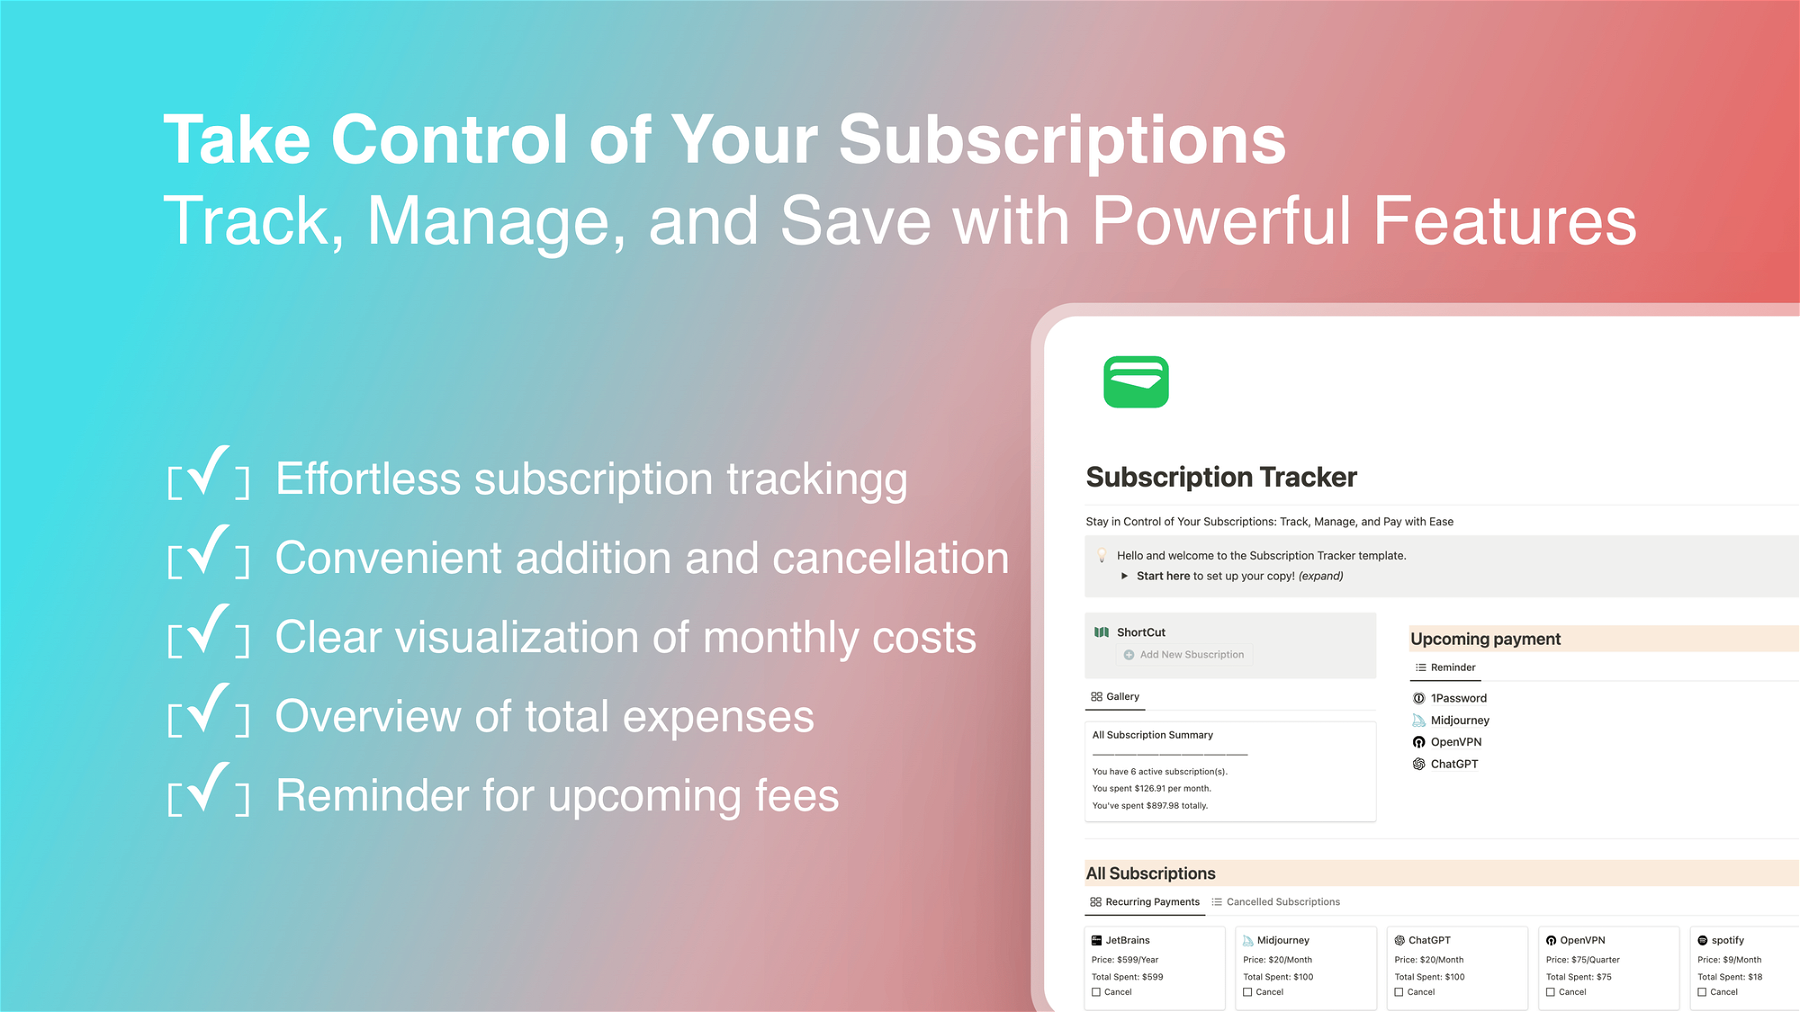 Take Control of Your Subscriptions Track, Manage, and Save with Powerful Features